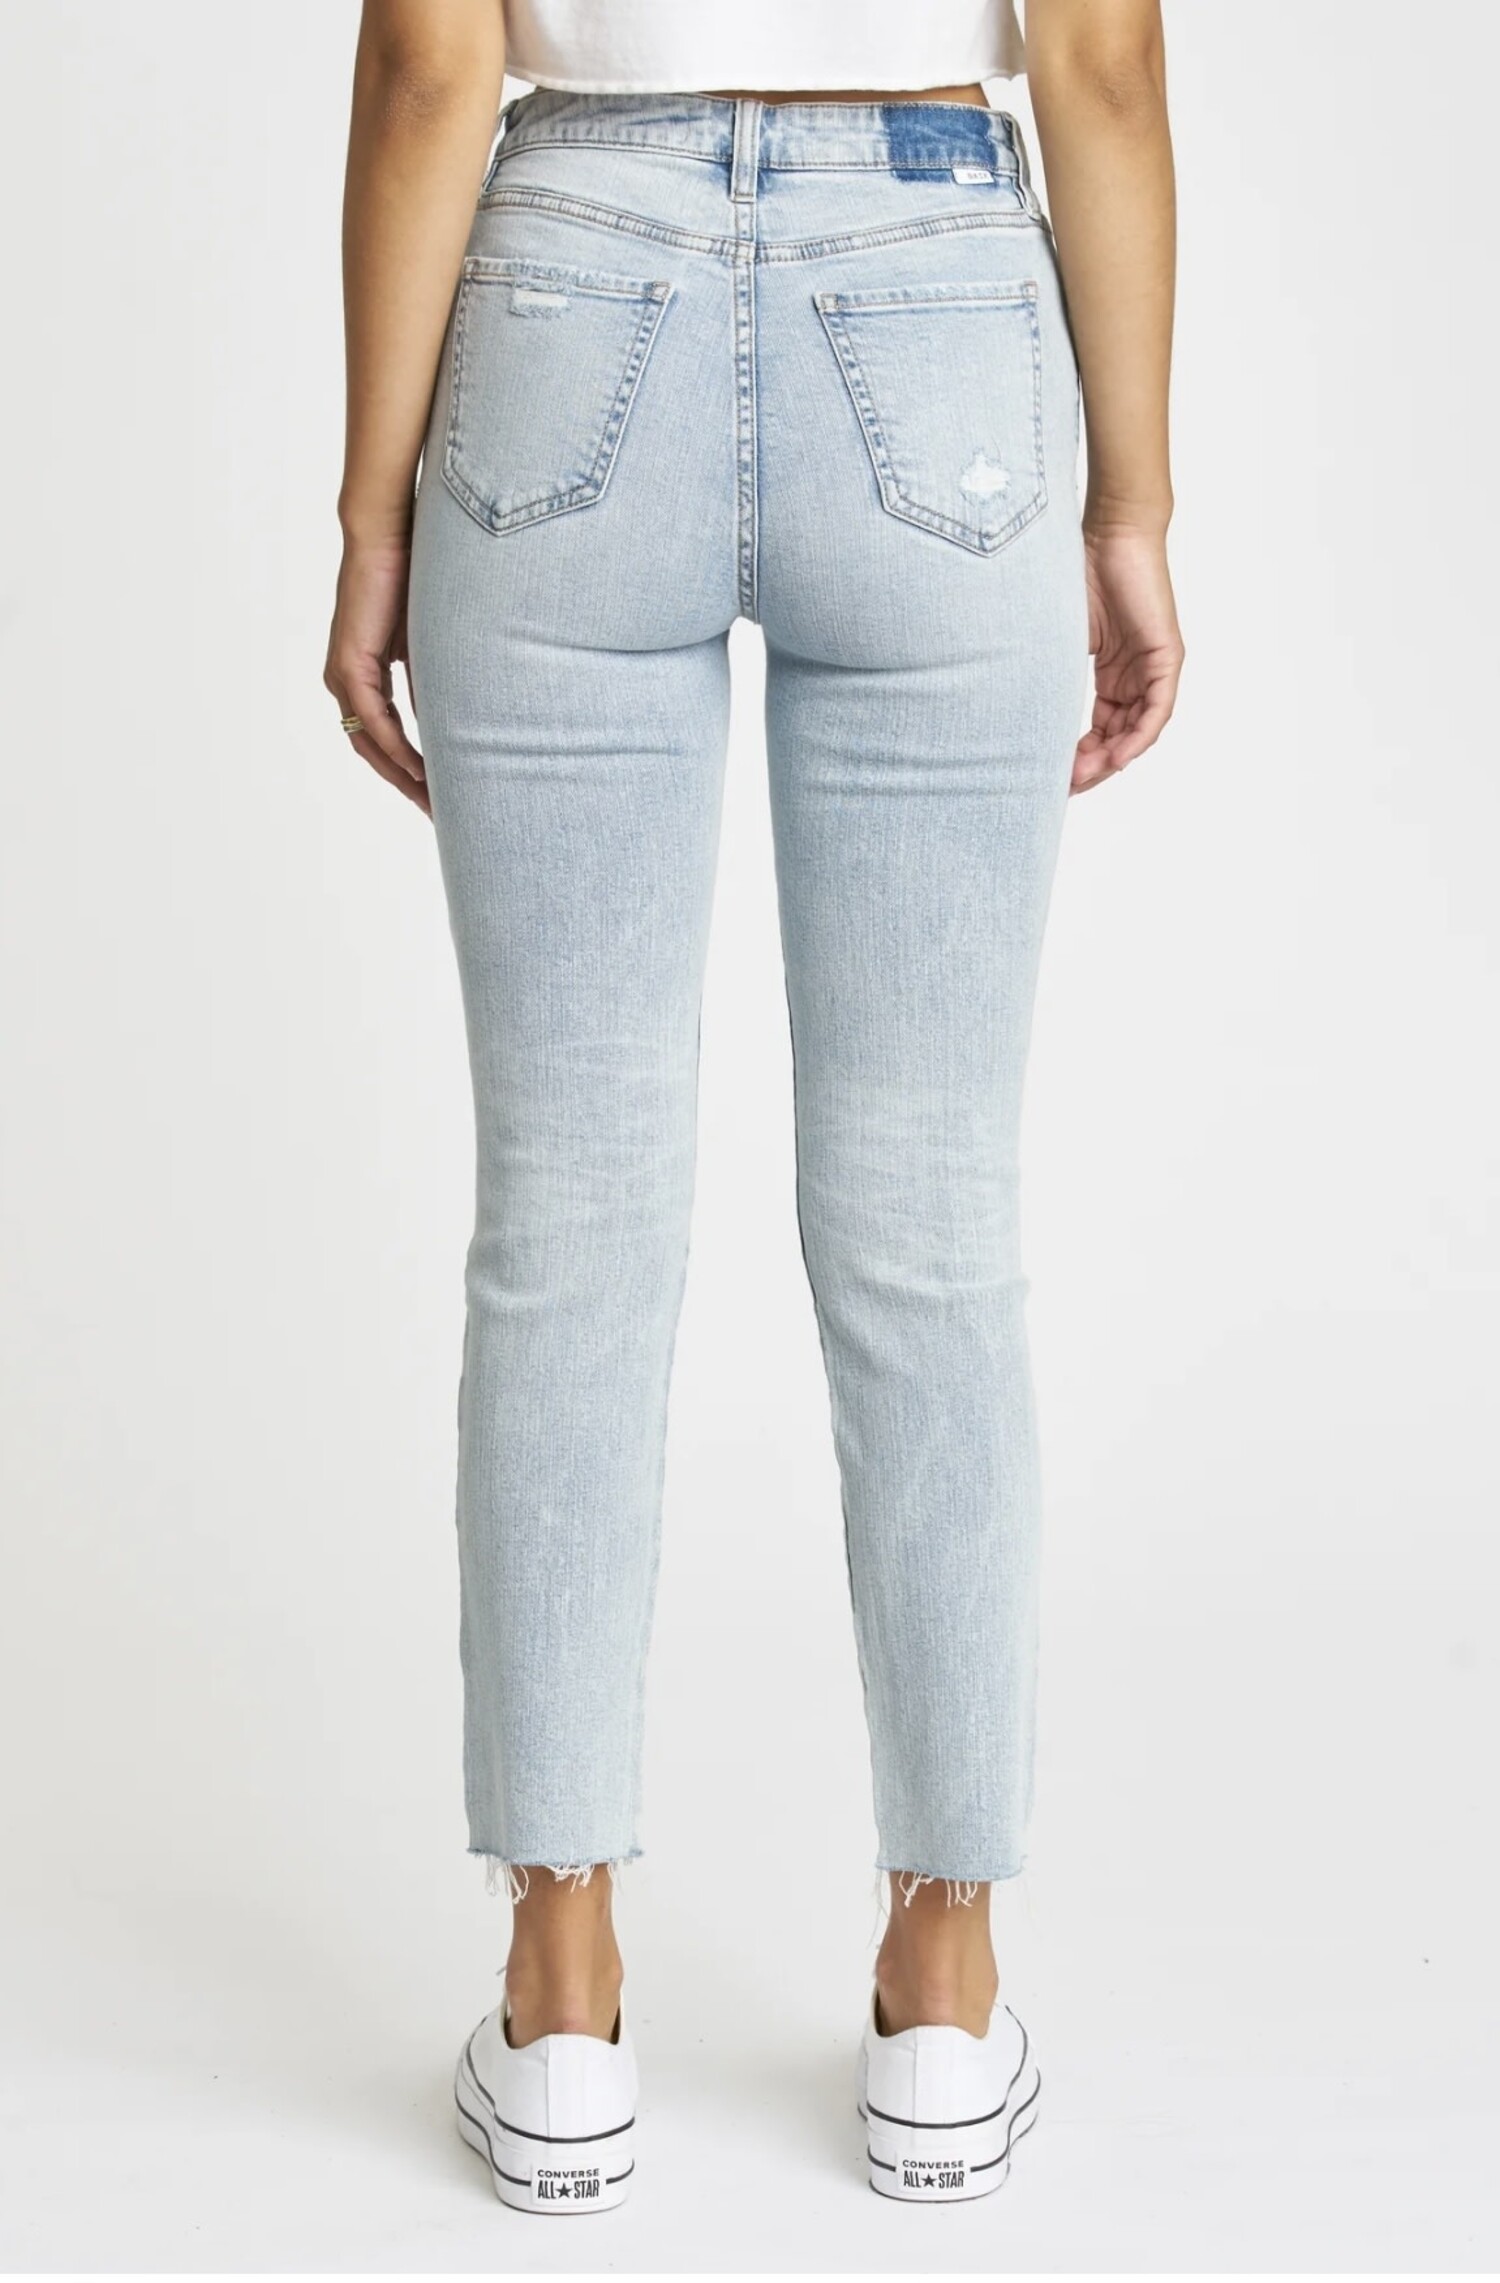 Daily Driver High Rise Skinny - Society Boutique